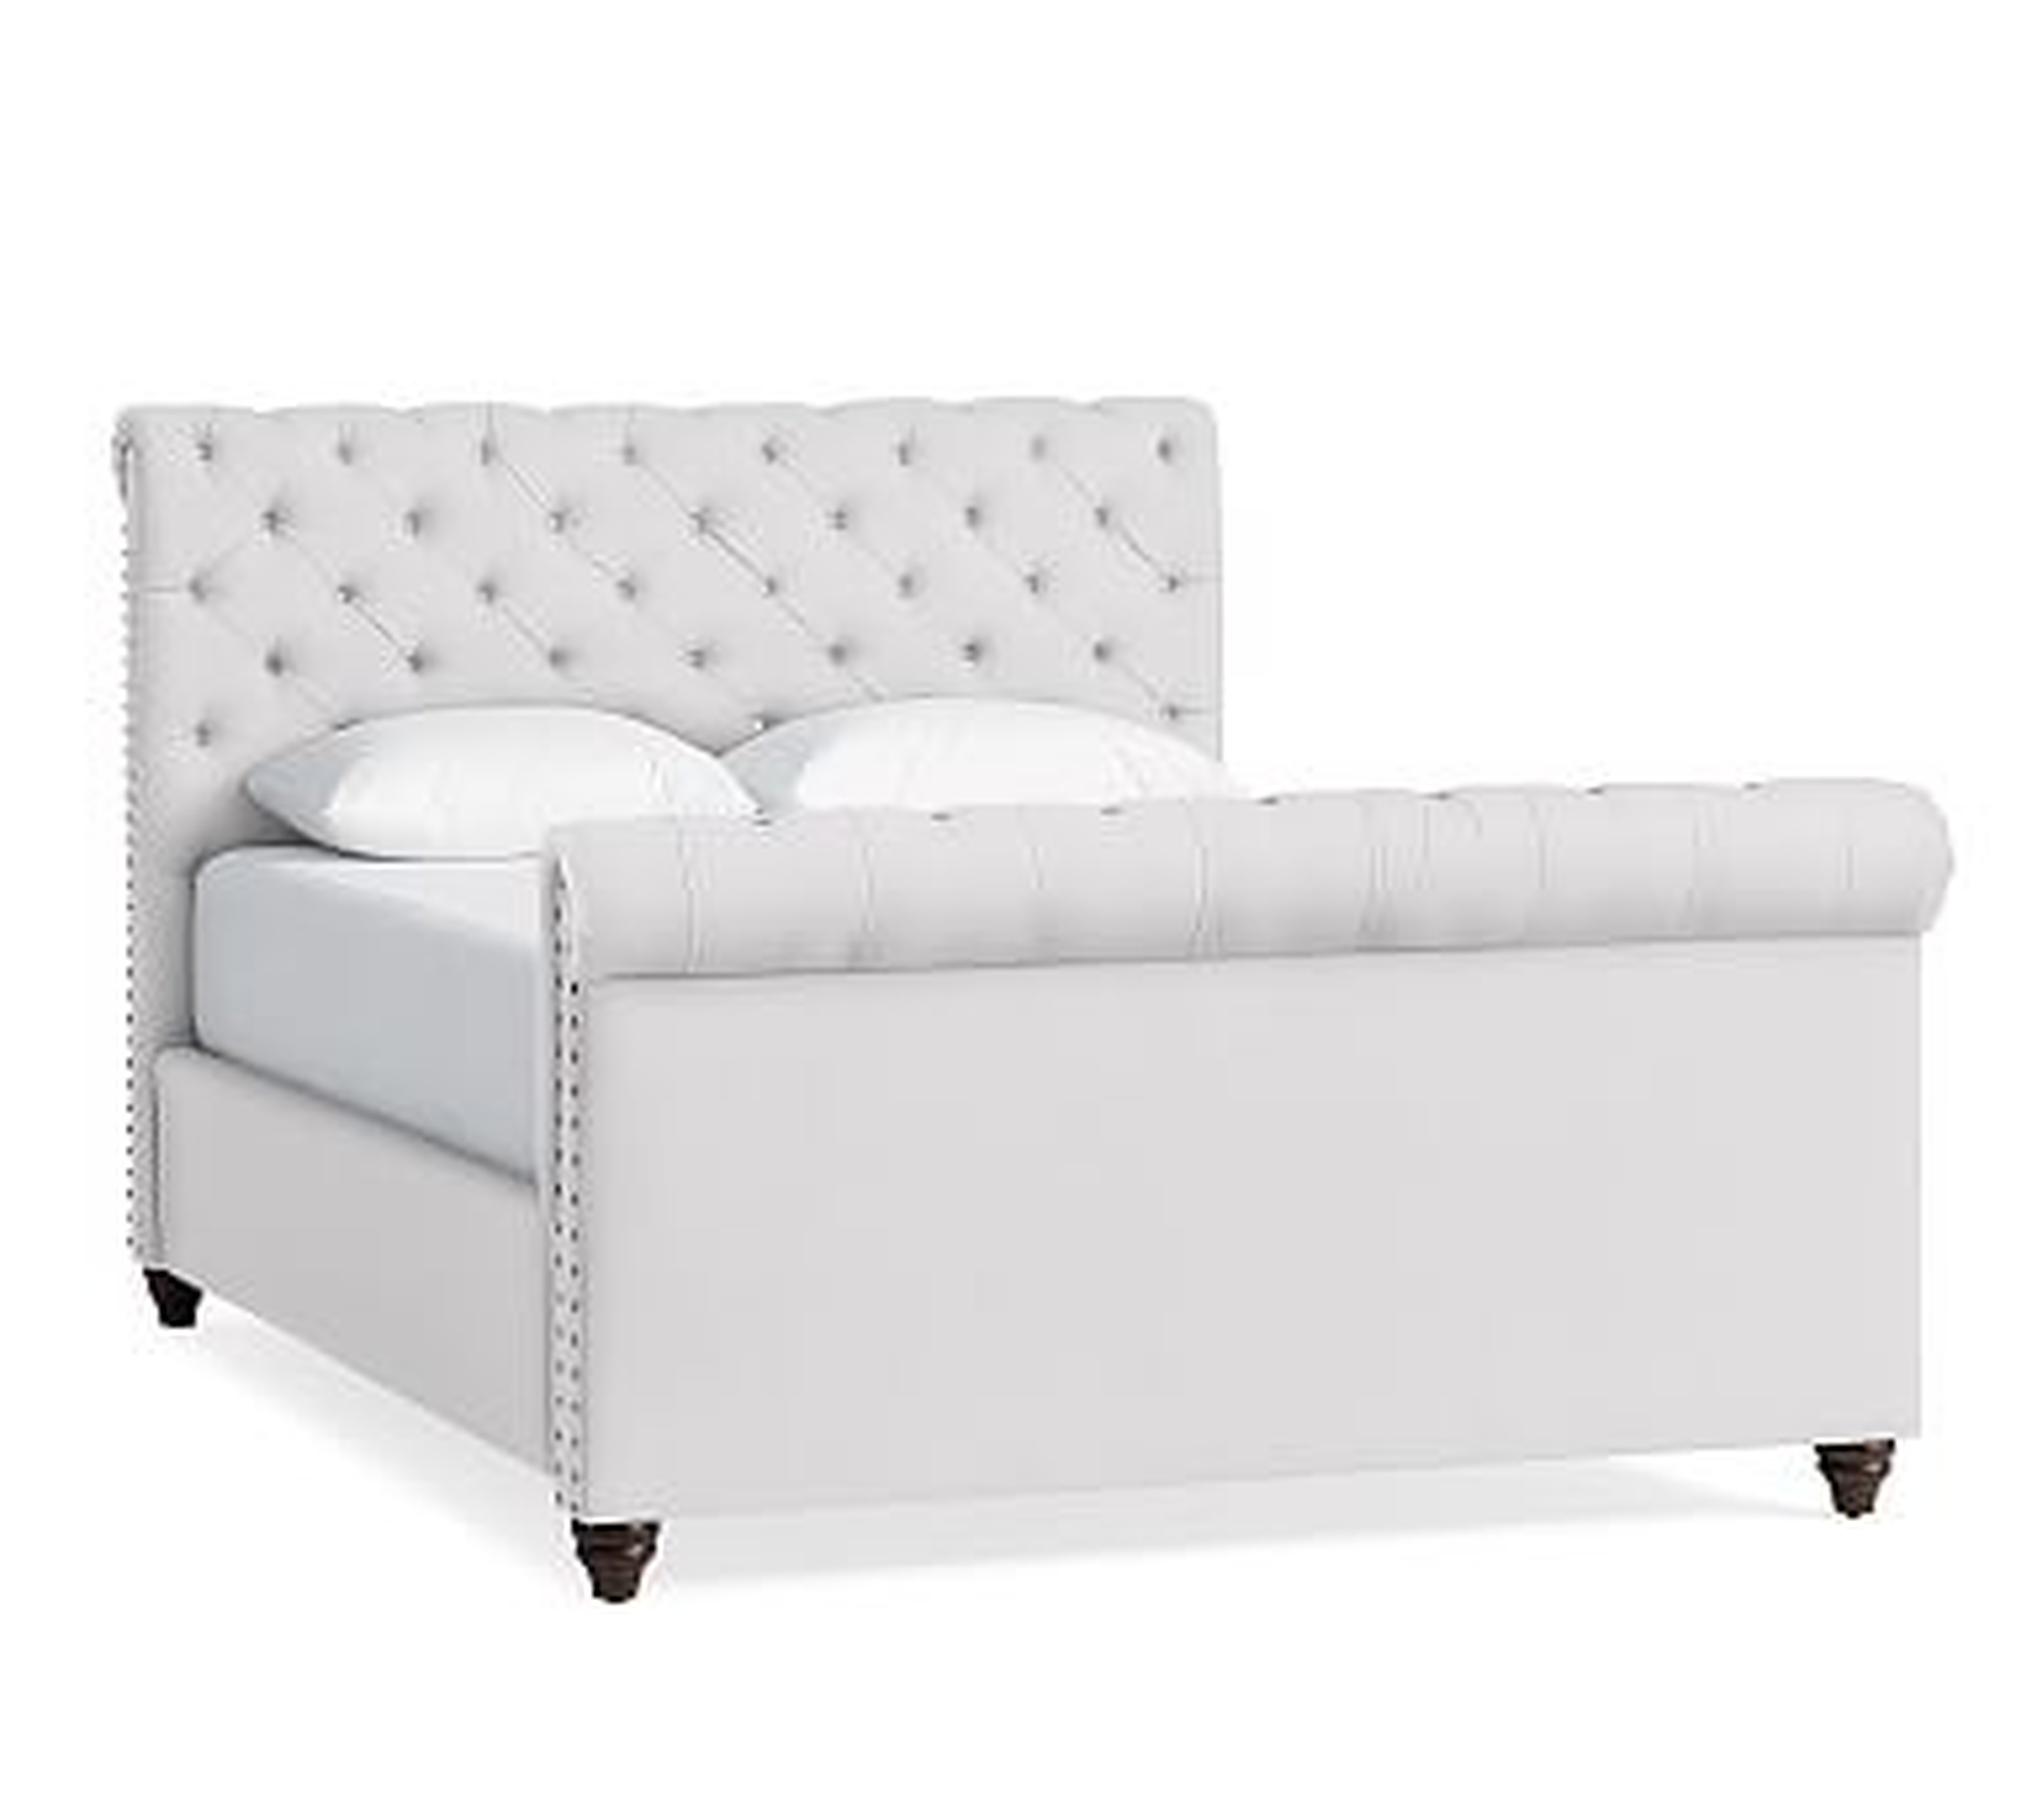 Chesterfield Upholstered Queen Bed with Tall Footboard, Twill White - Pottery Barn